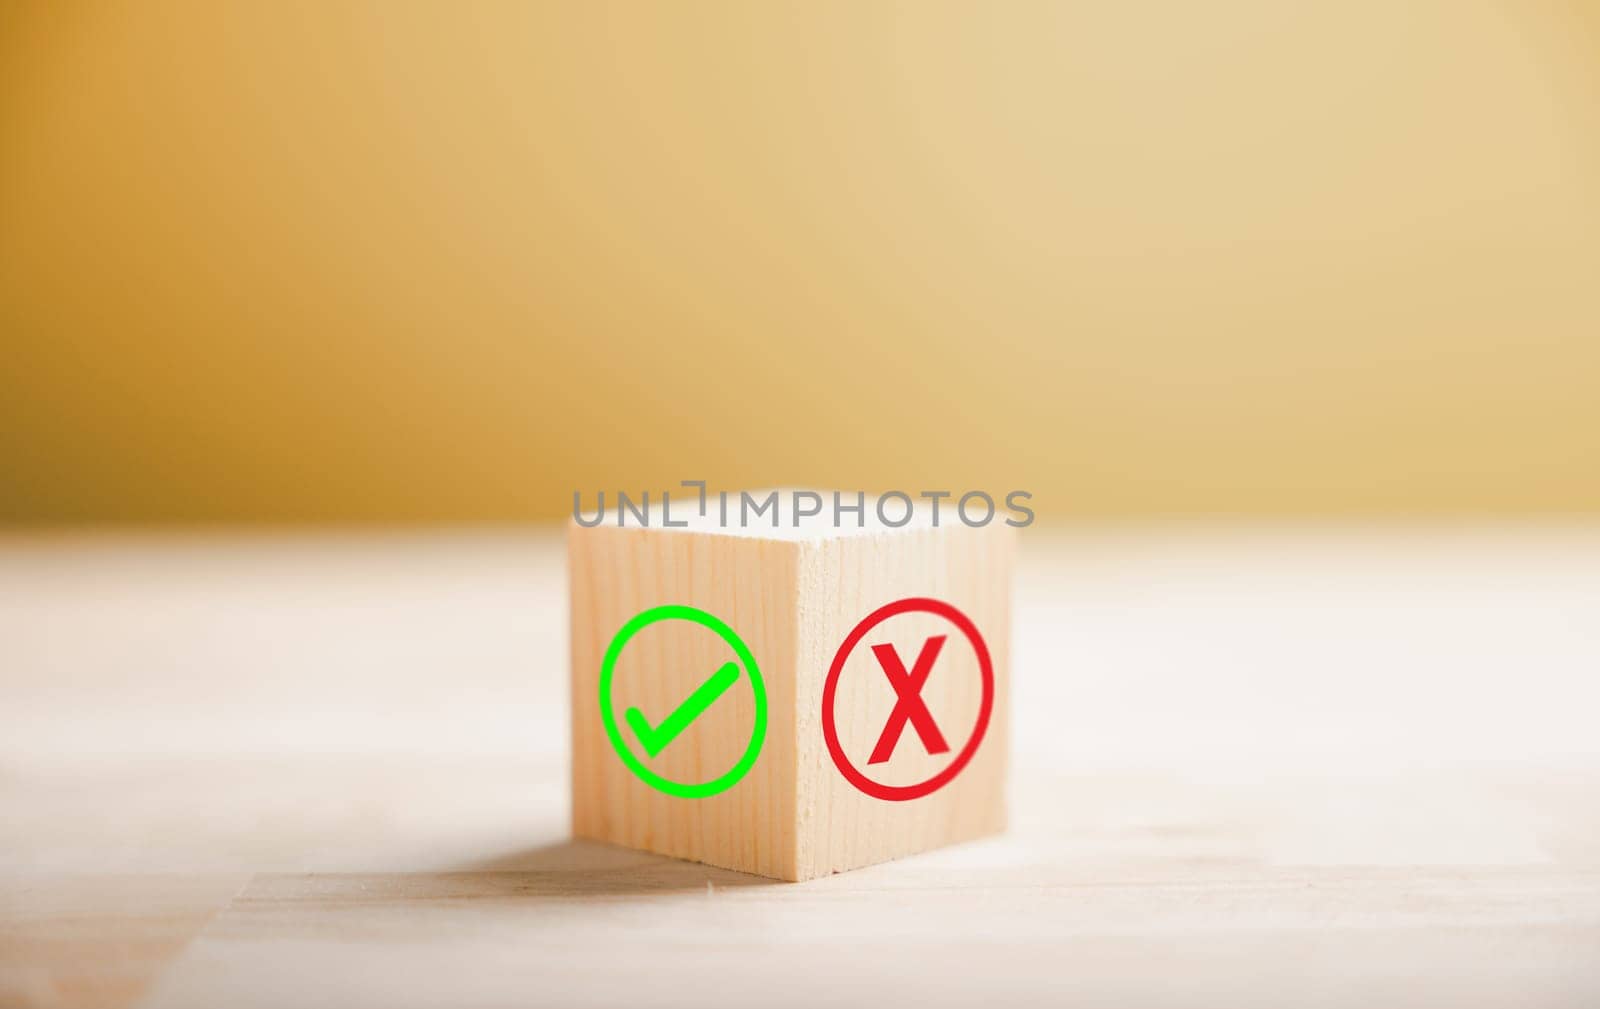 Wooden block presents green check mark and red x symbolizing decision making. Choice concept. Think With Yes Or No Choice.